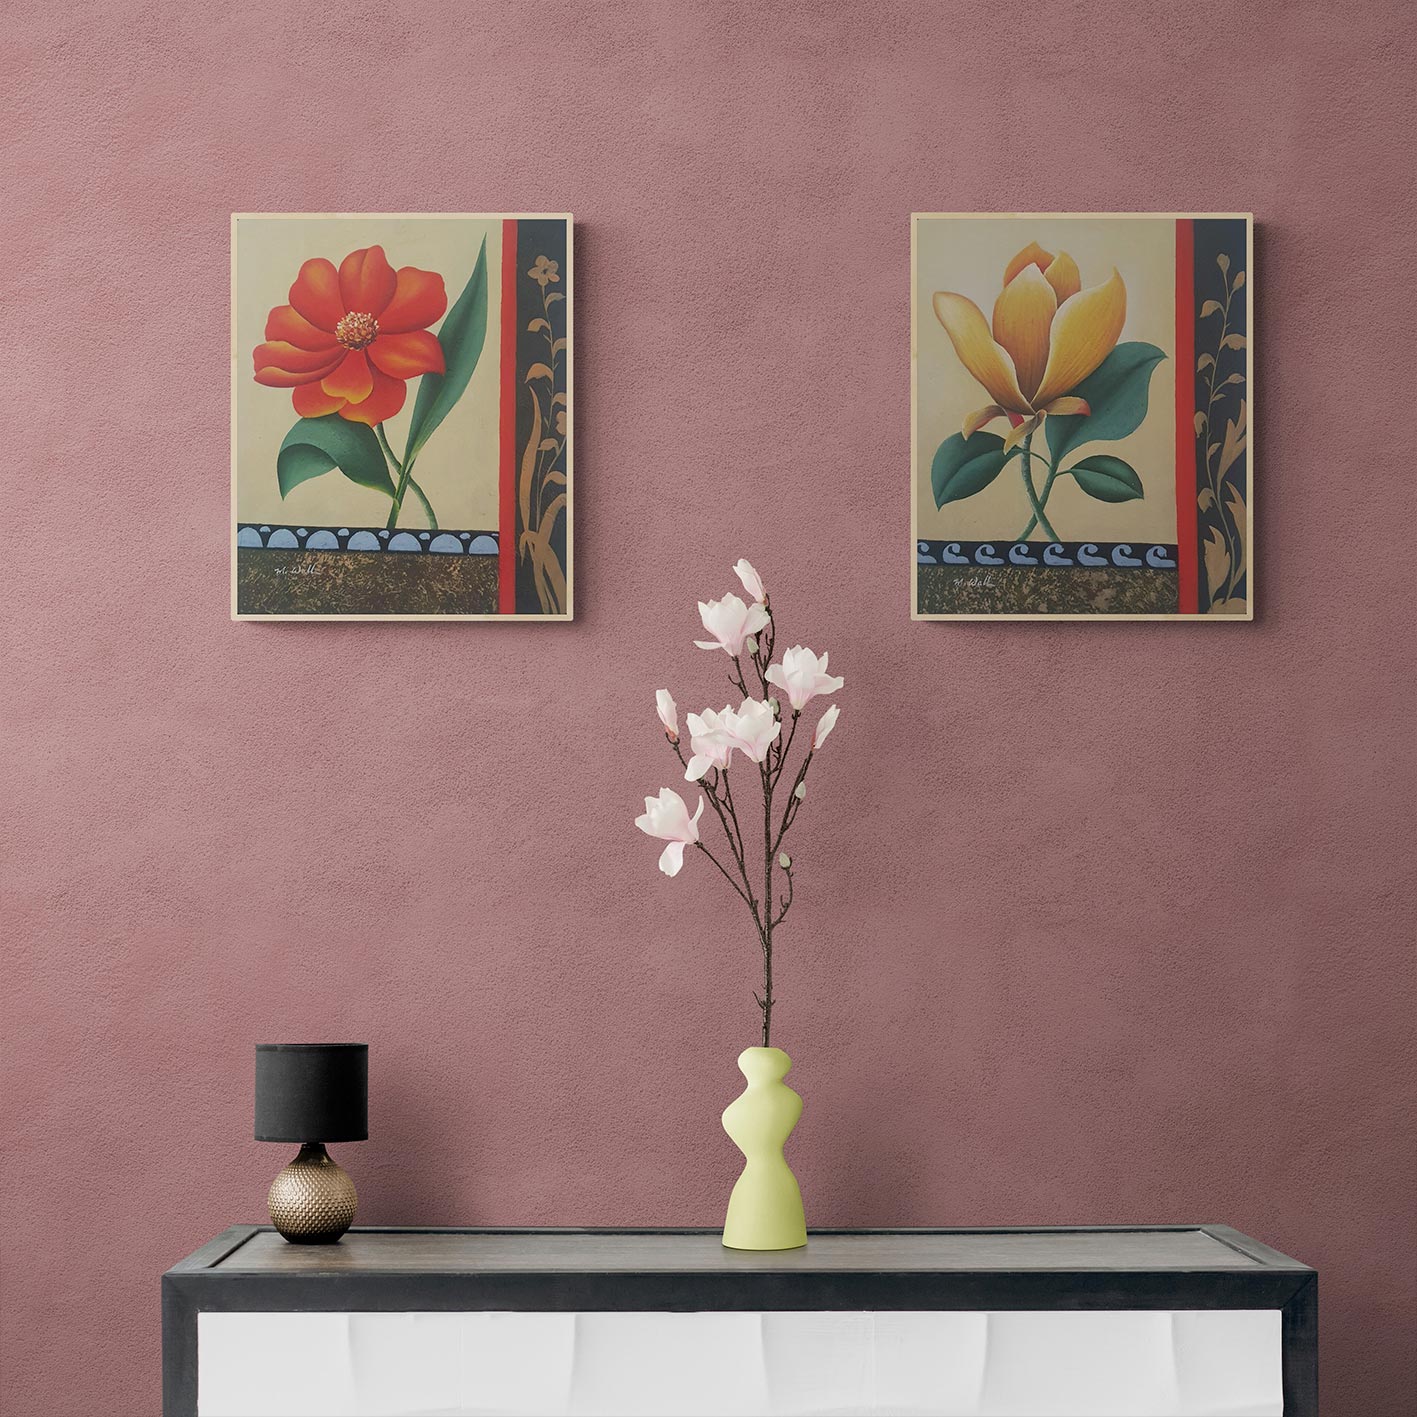 Flowery Diptych Painting 50x60 cm [2 pieces]